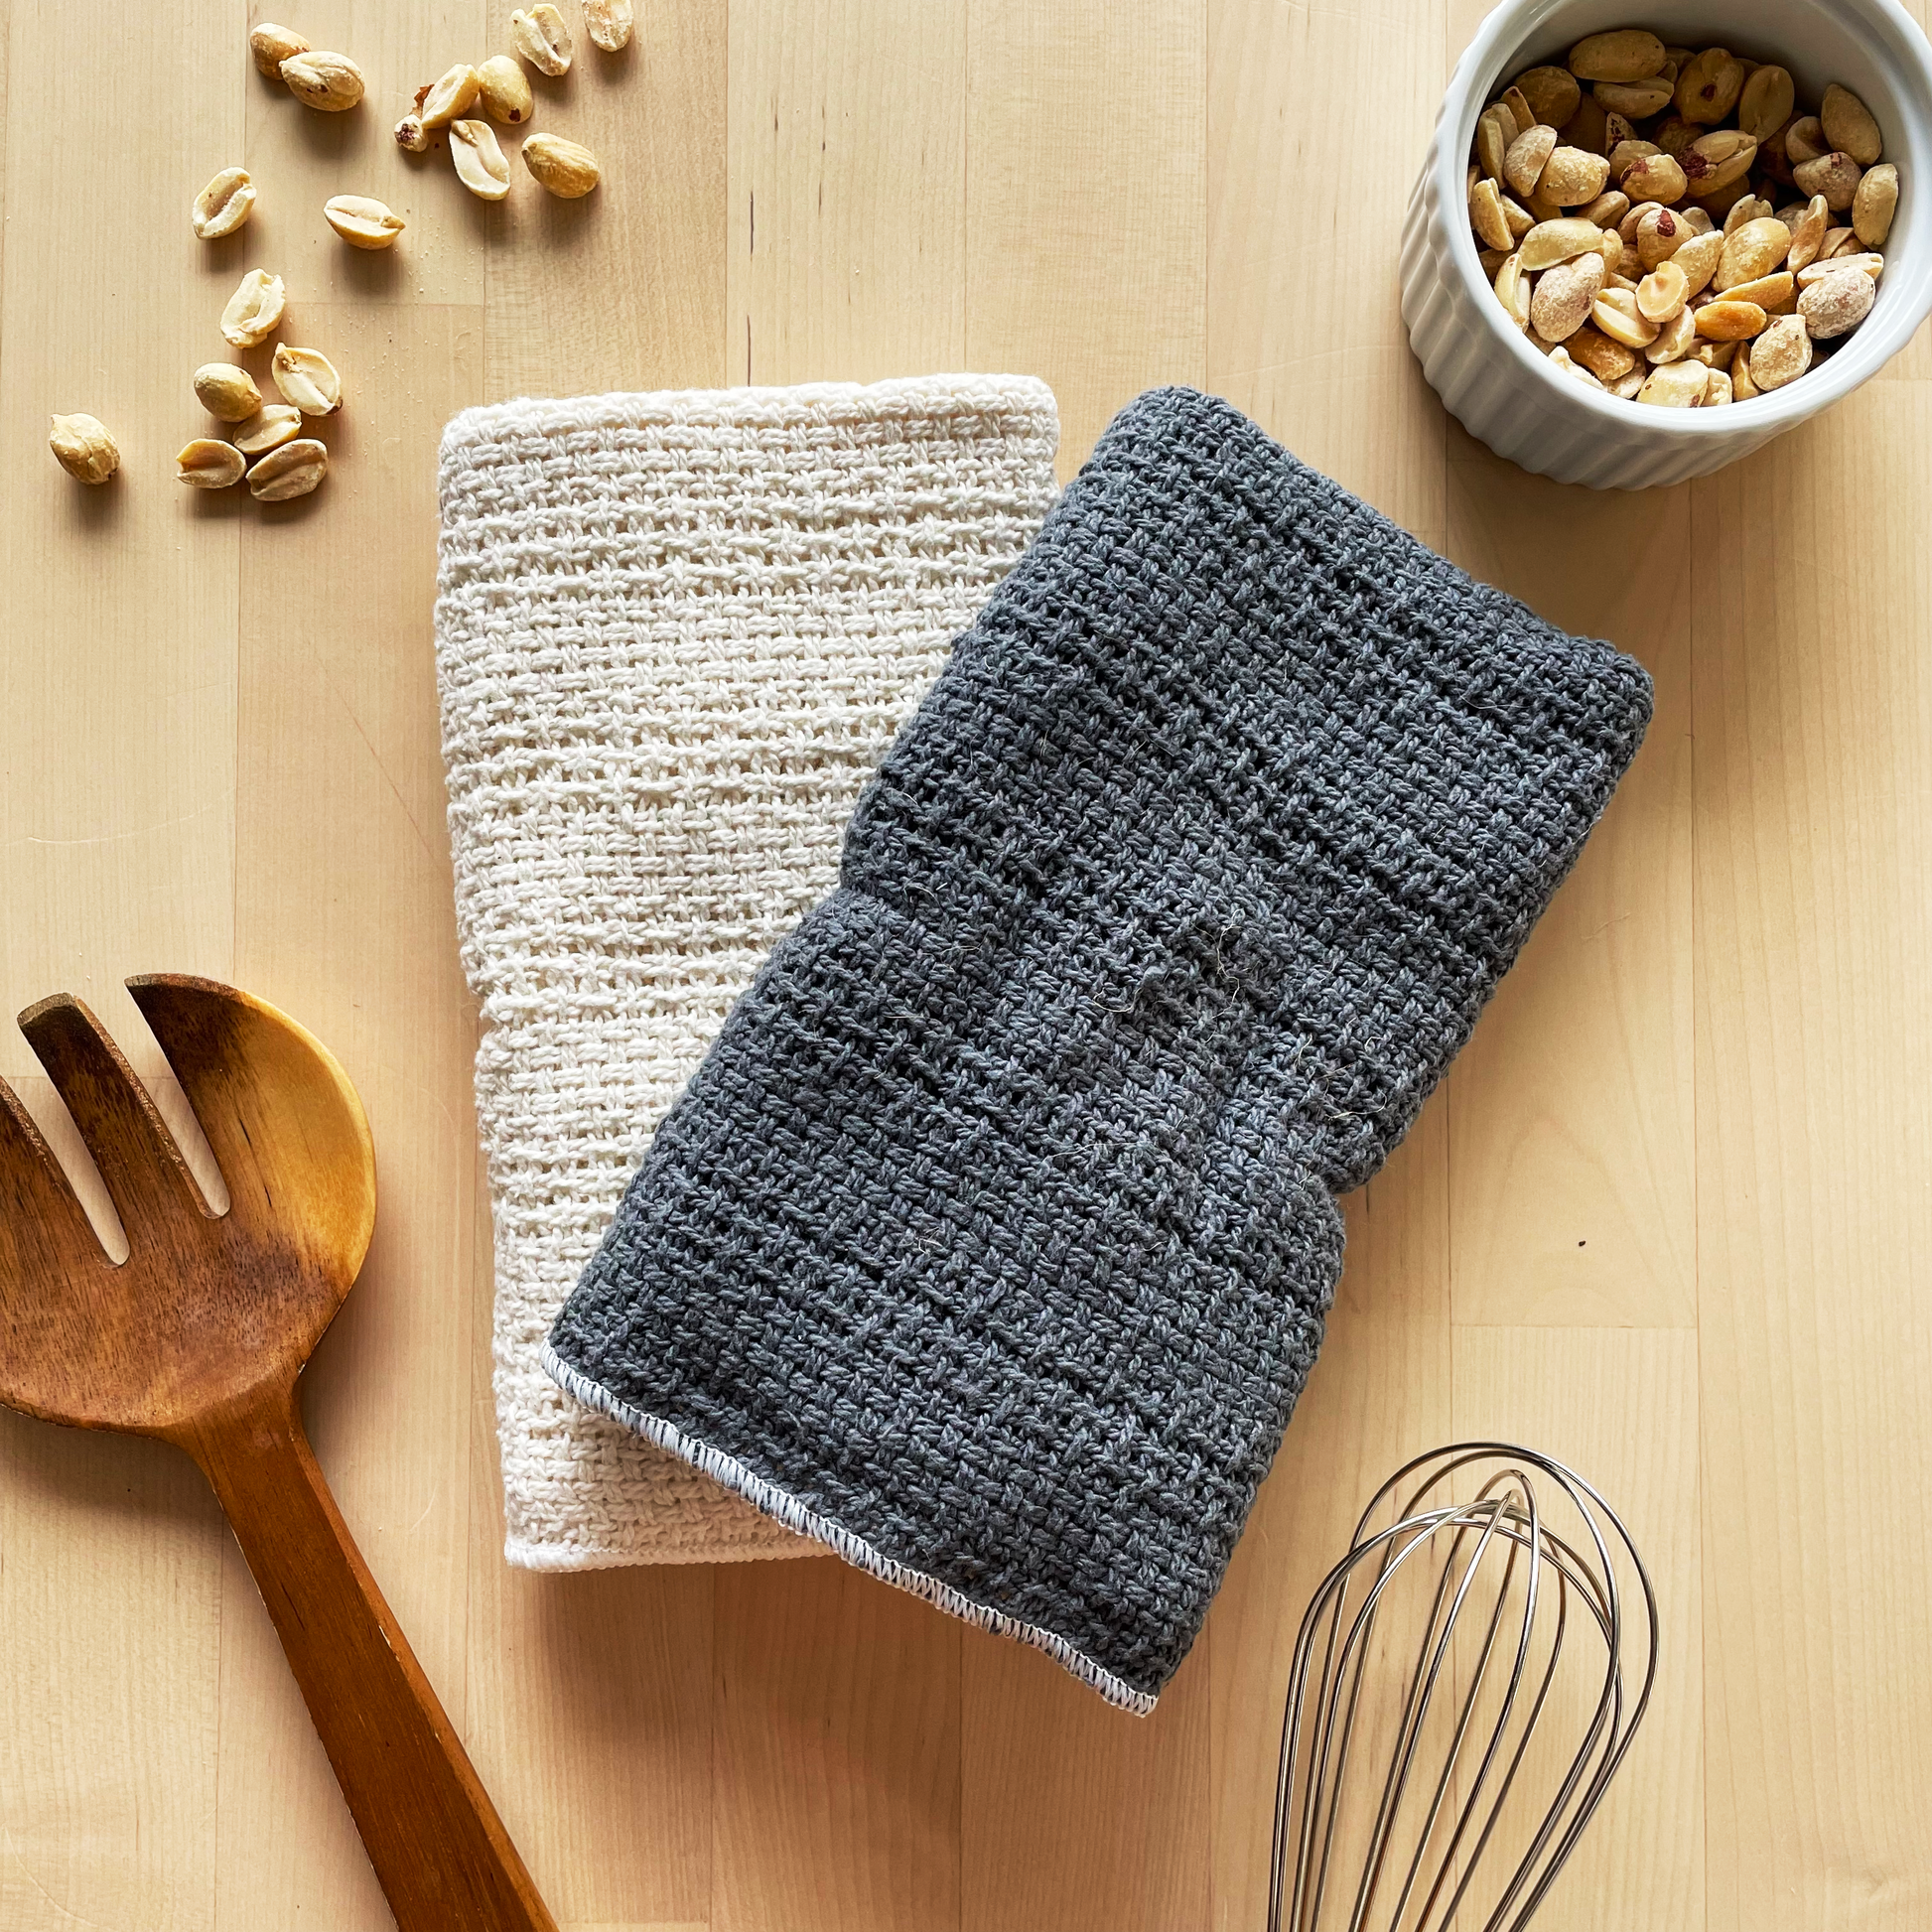 Best Selling Kitchen Towels Made in America Kitchen Collection